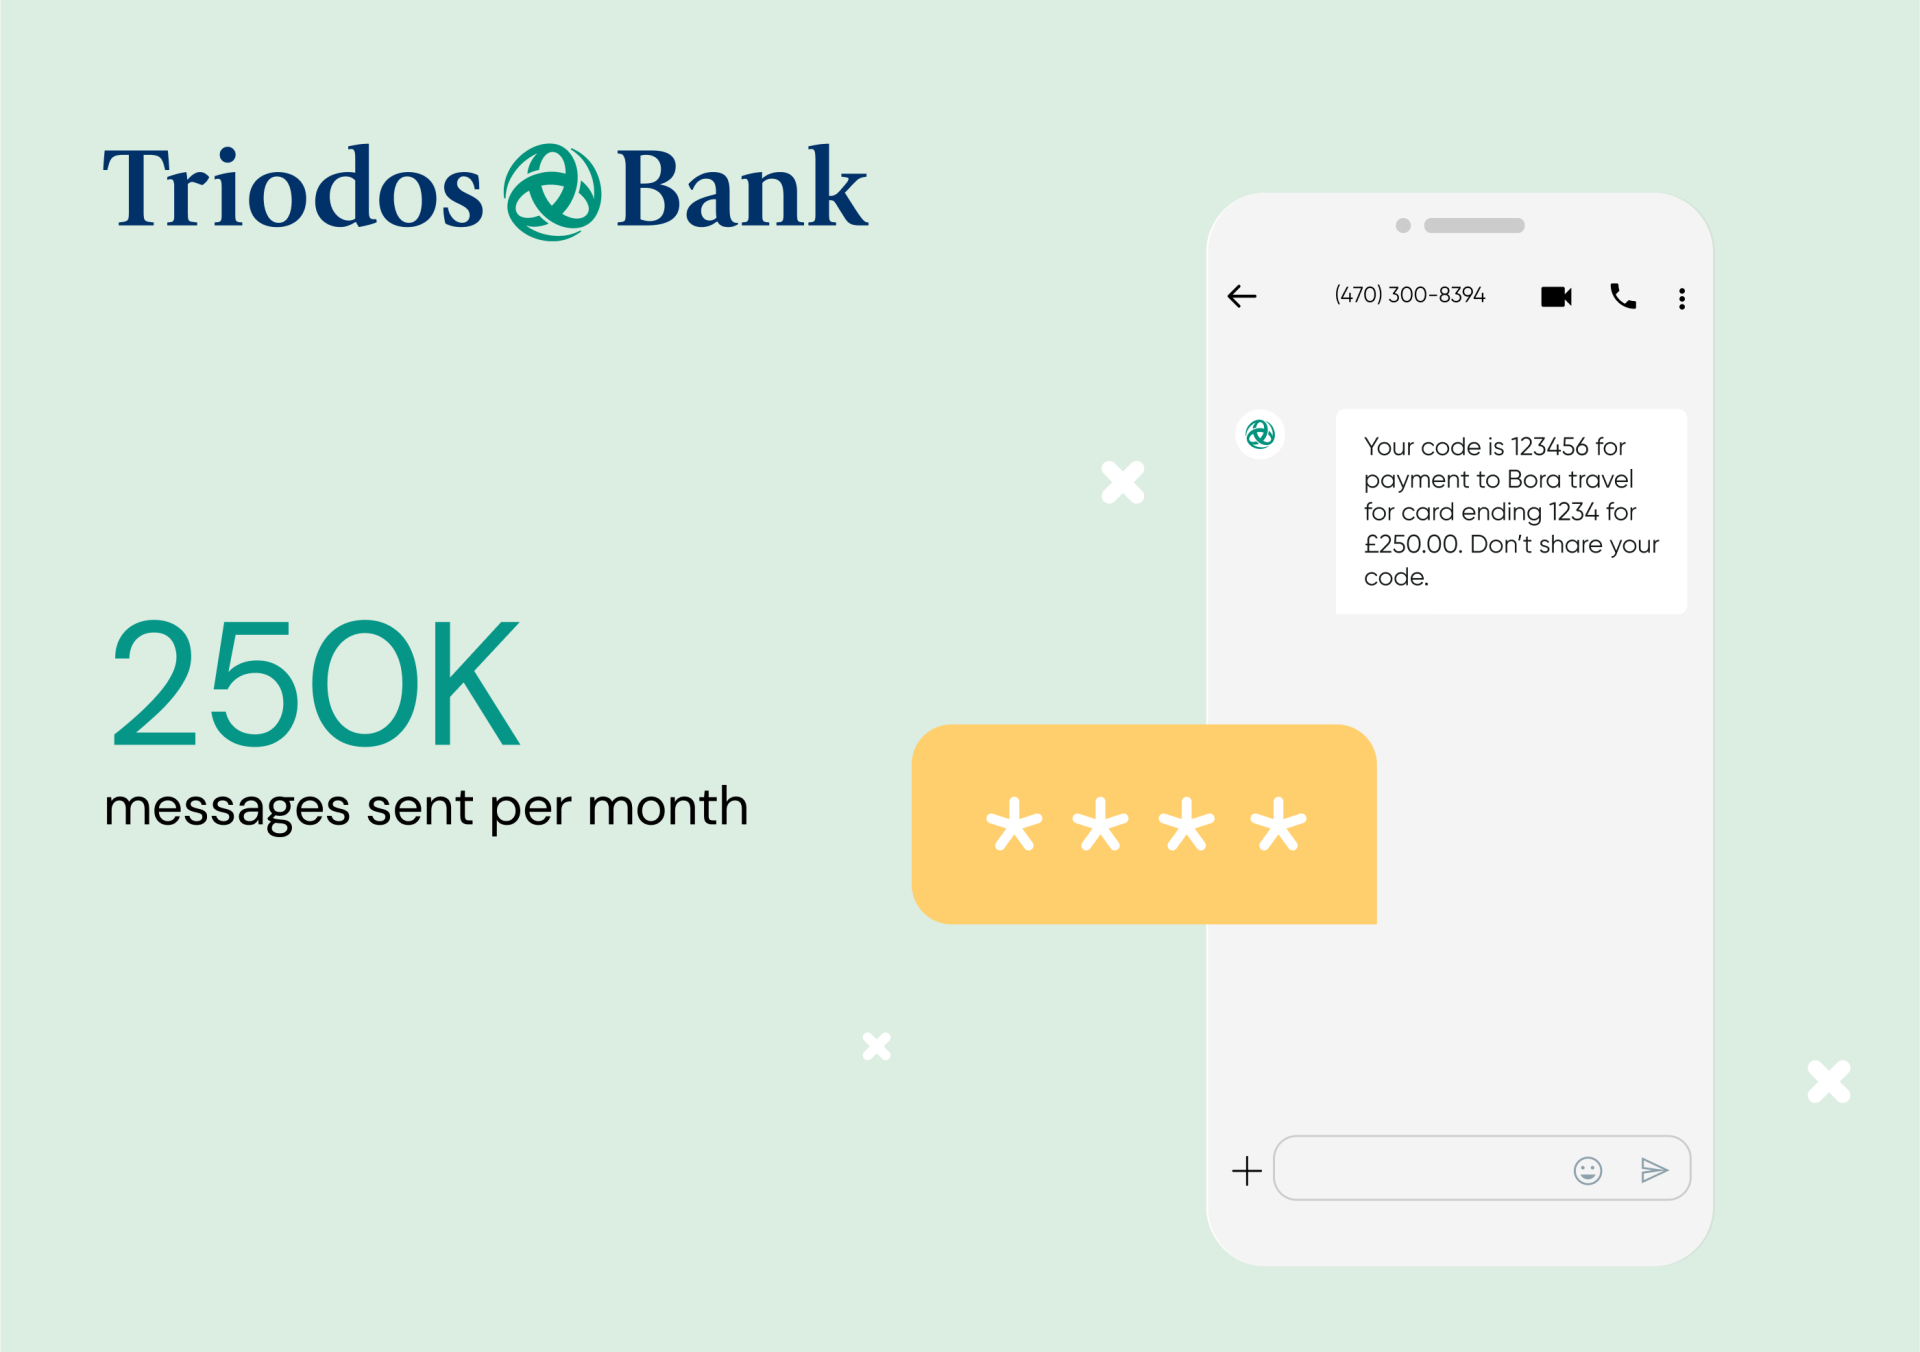 Triodos Bank SMS marketing example of a transactional text message